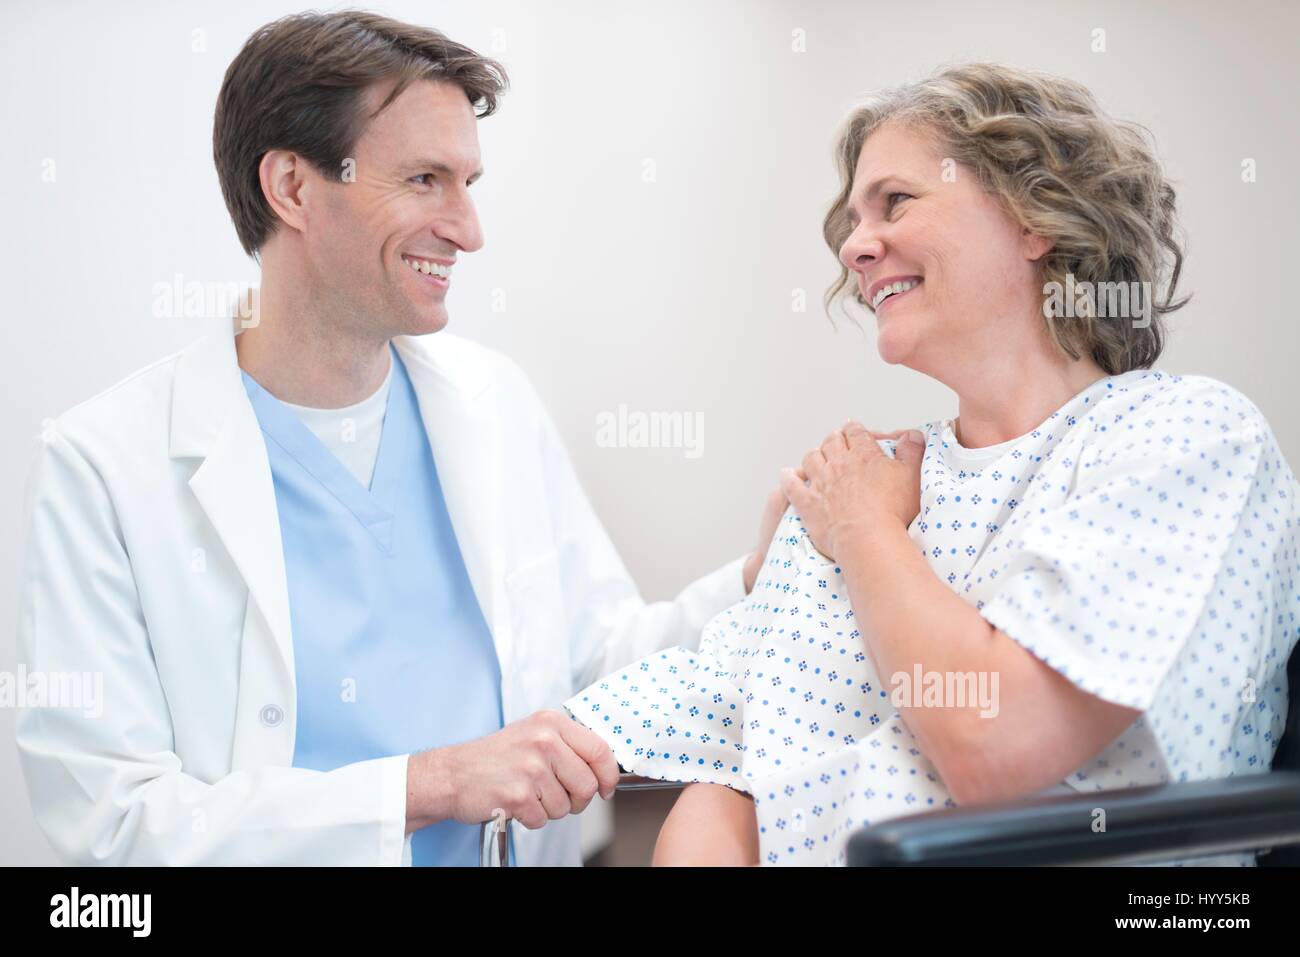 Male doctor smiling at mature female patient. Stock Photo